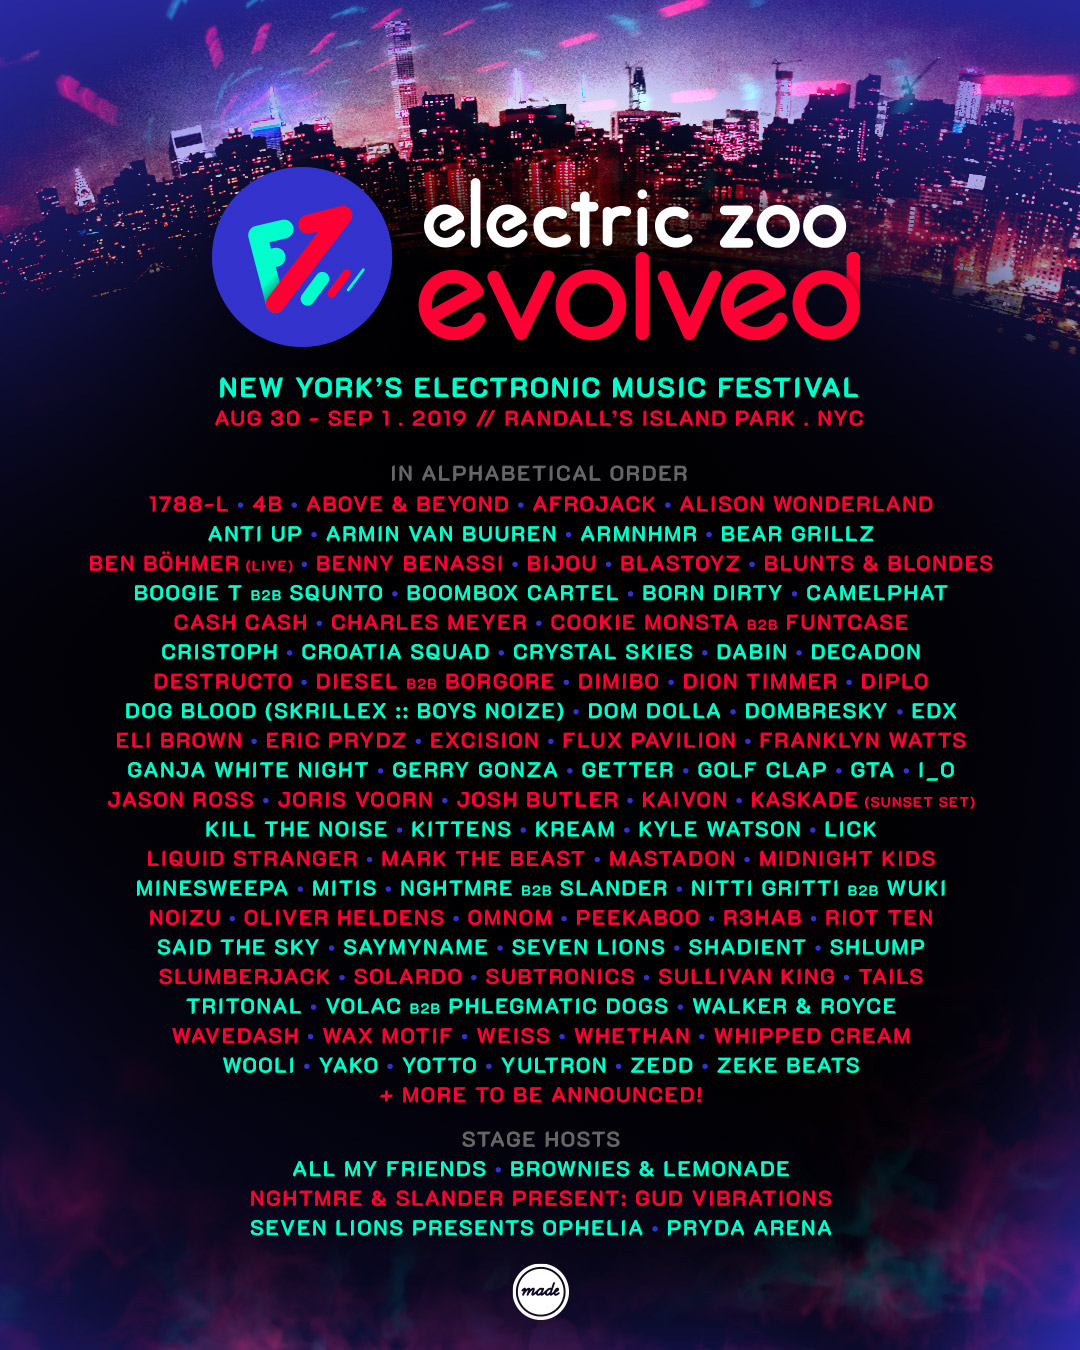 Electric Zoo Evolved 2019 Lineup